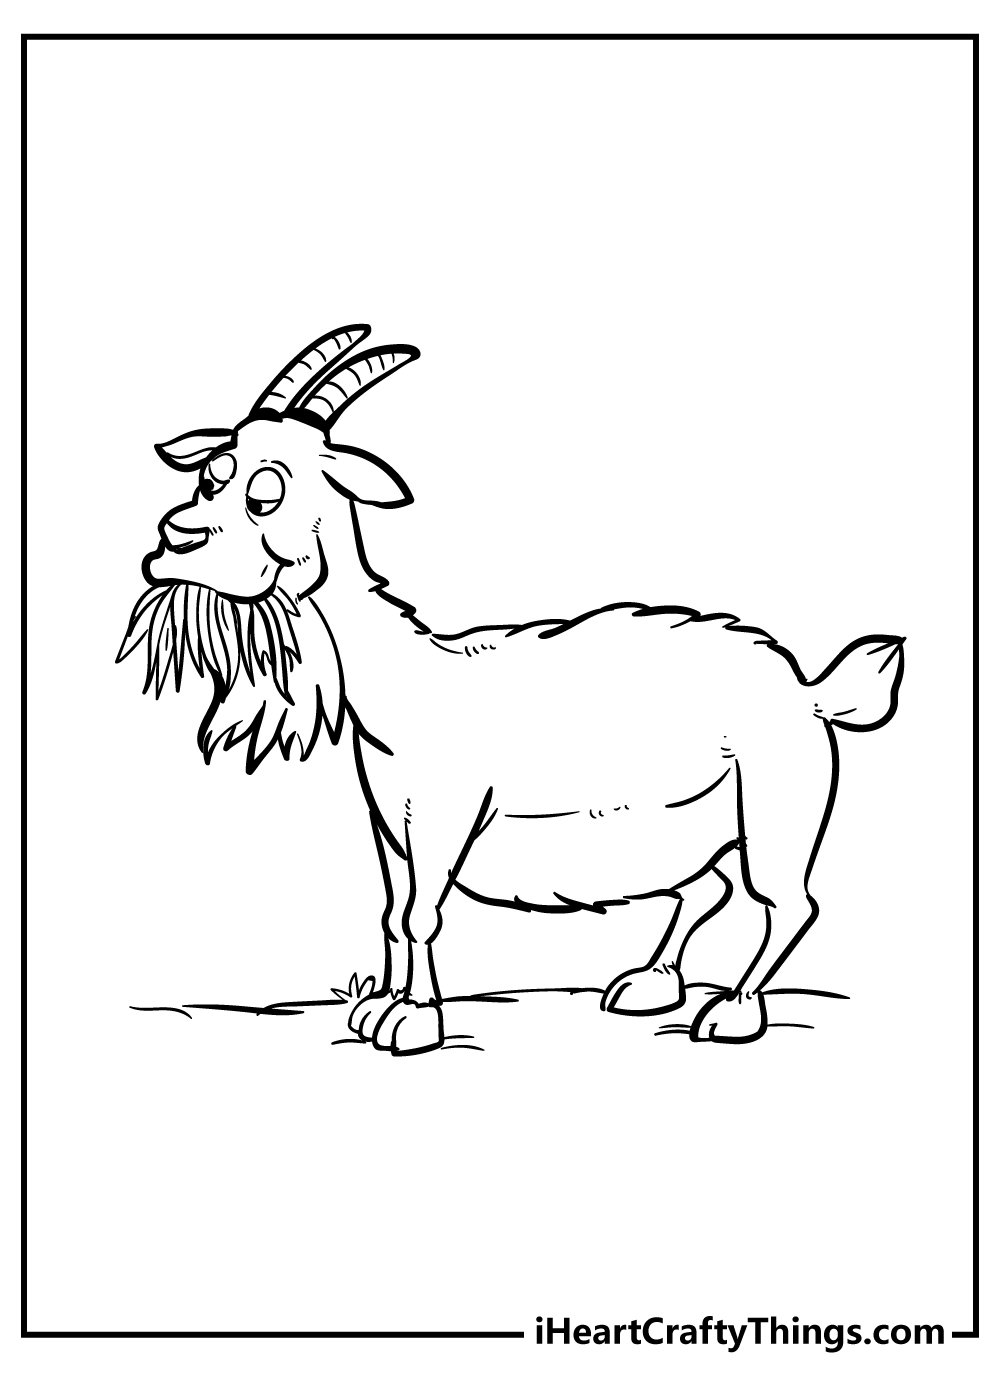 Goat Coloring Pages free pdf download